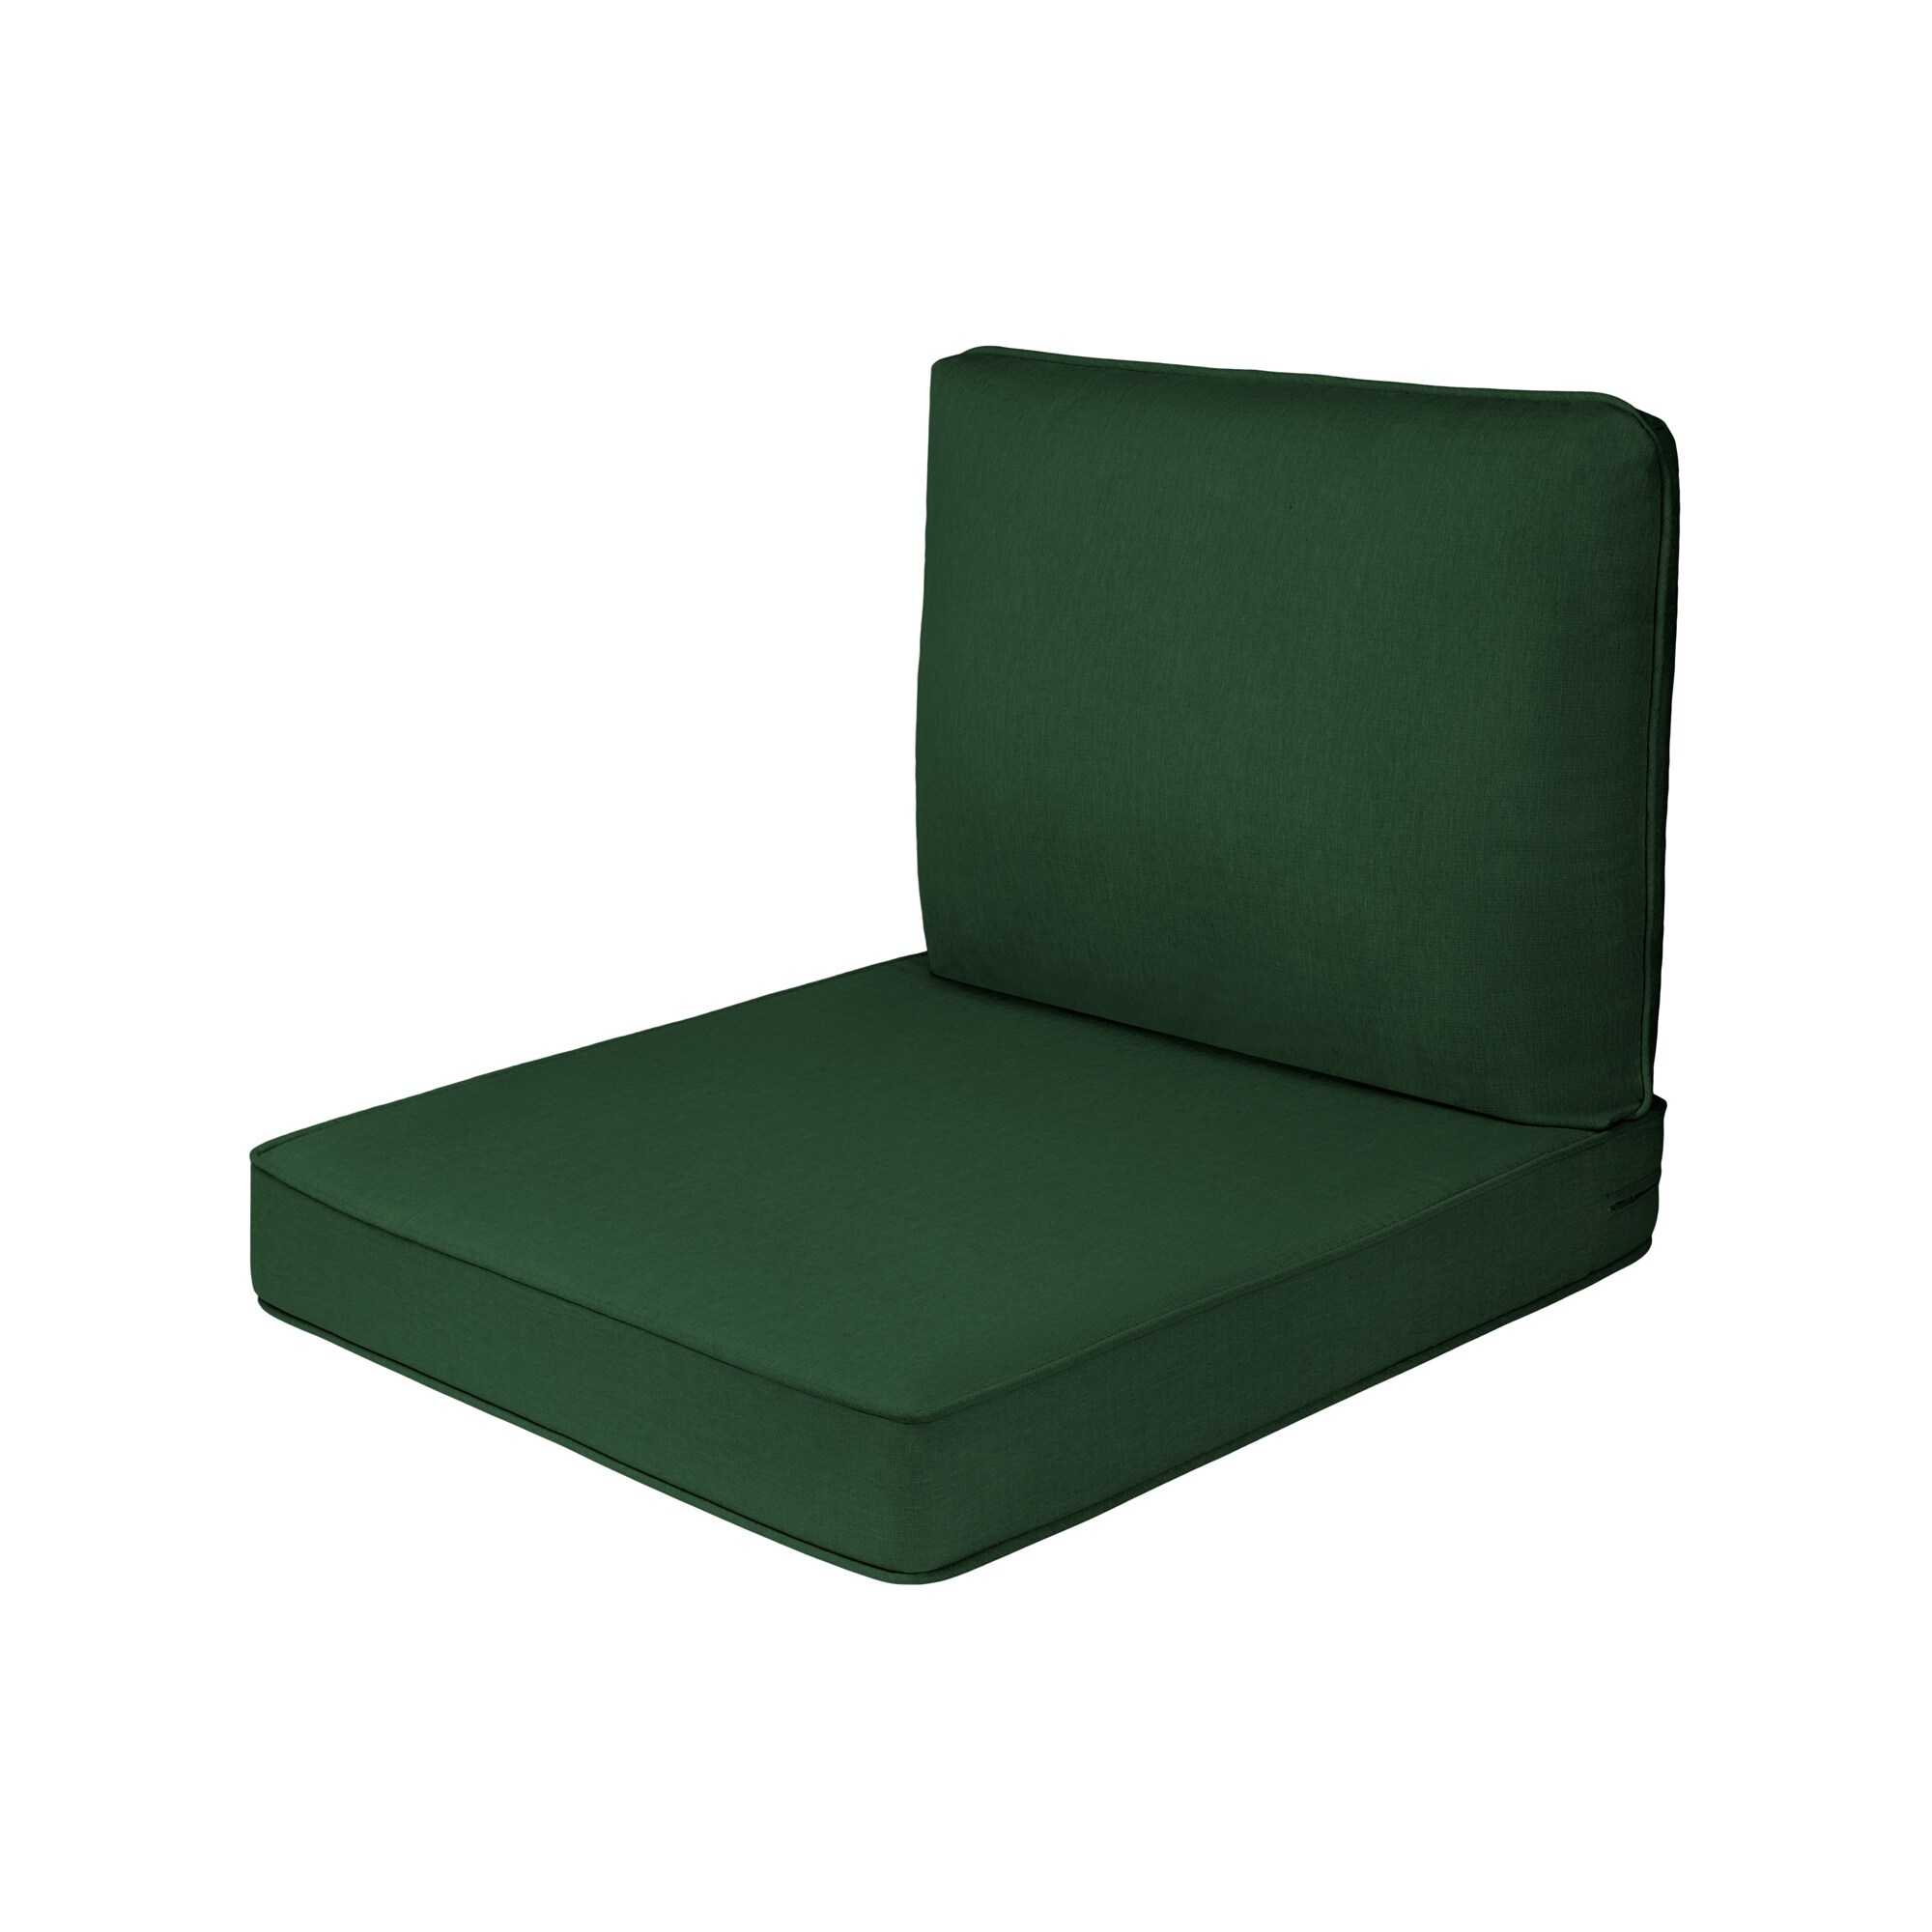 https://ak1.ostkcdn.com/images/products/is/images/direct/1550b7e13beee21129dea94cc82cc82015e96f2d/Haven-Way-Outdoor-Seat-%26-Back-Cushion-Set.jpg